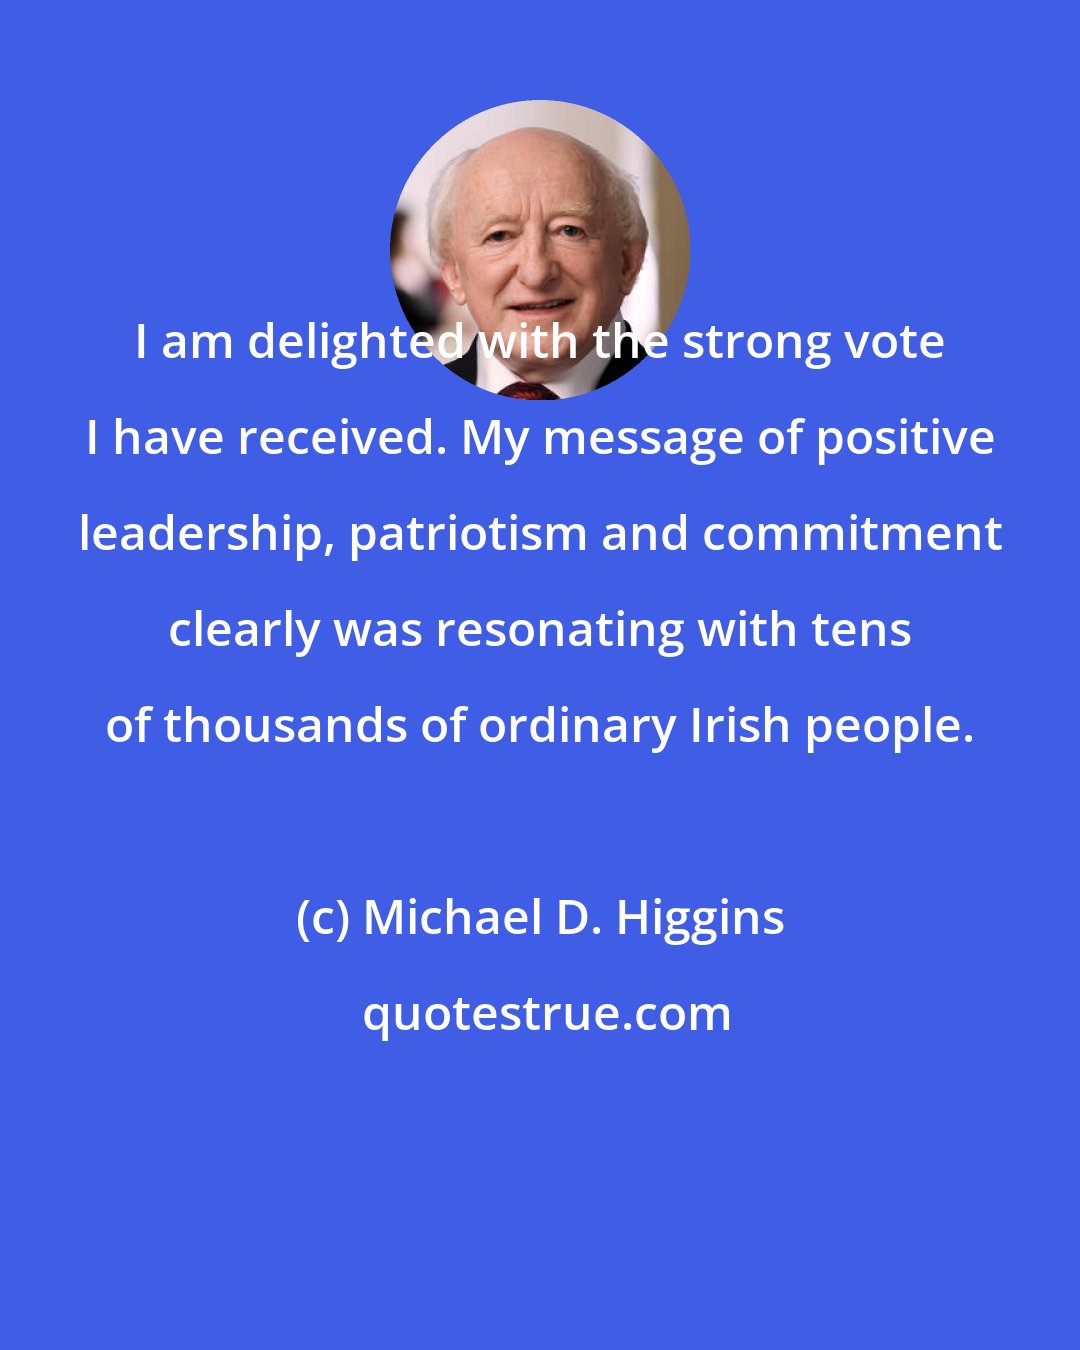 Michael D. Higgins: I am delighted with the strong vote I have received. My message of positive leadership, patriotism and commitment clearly was resonating with tens of thousands of ordinary Irish people.